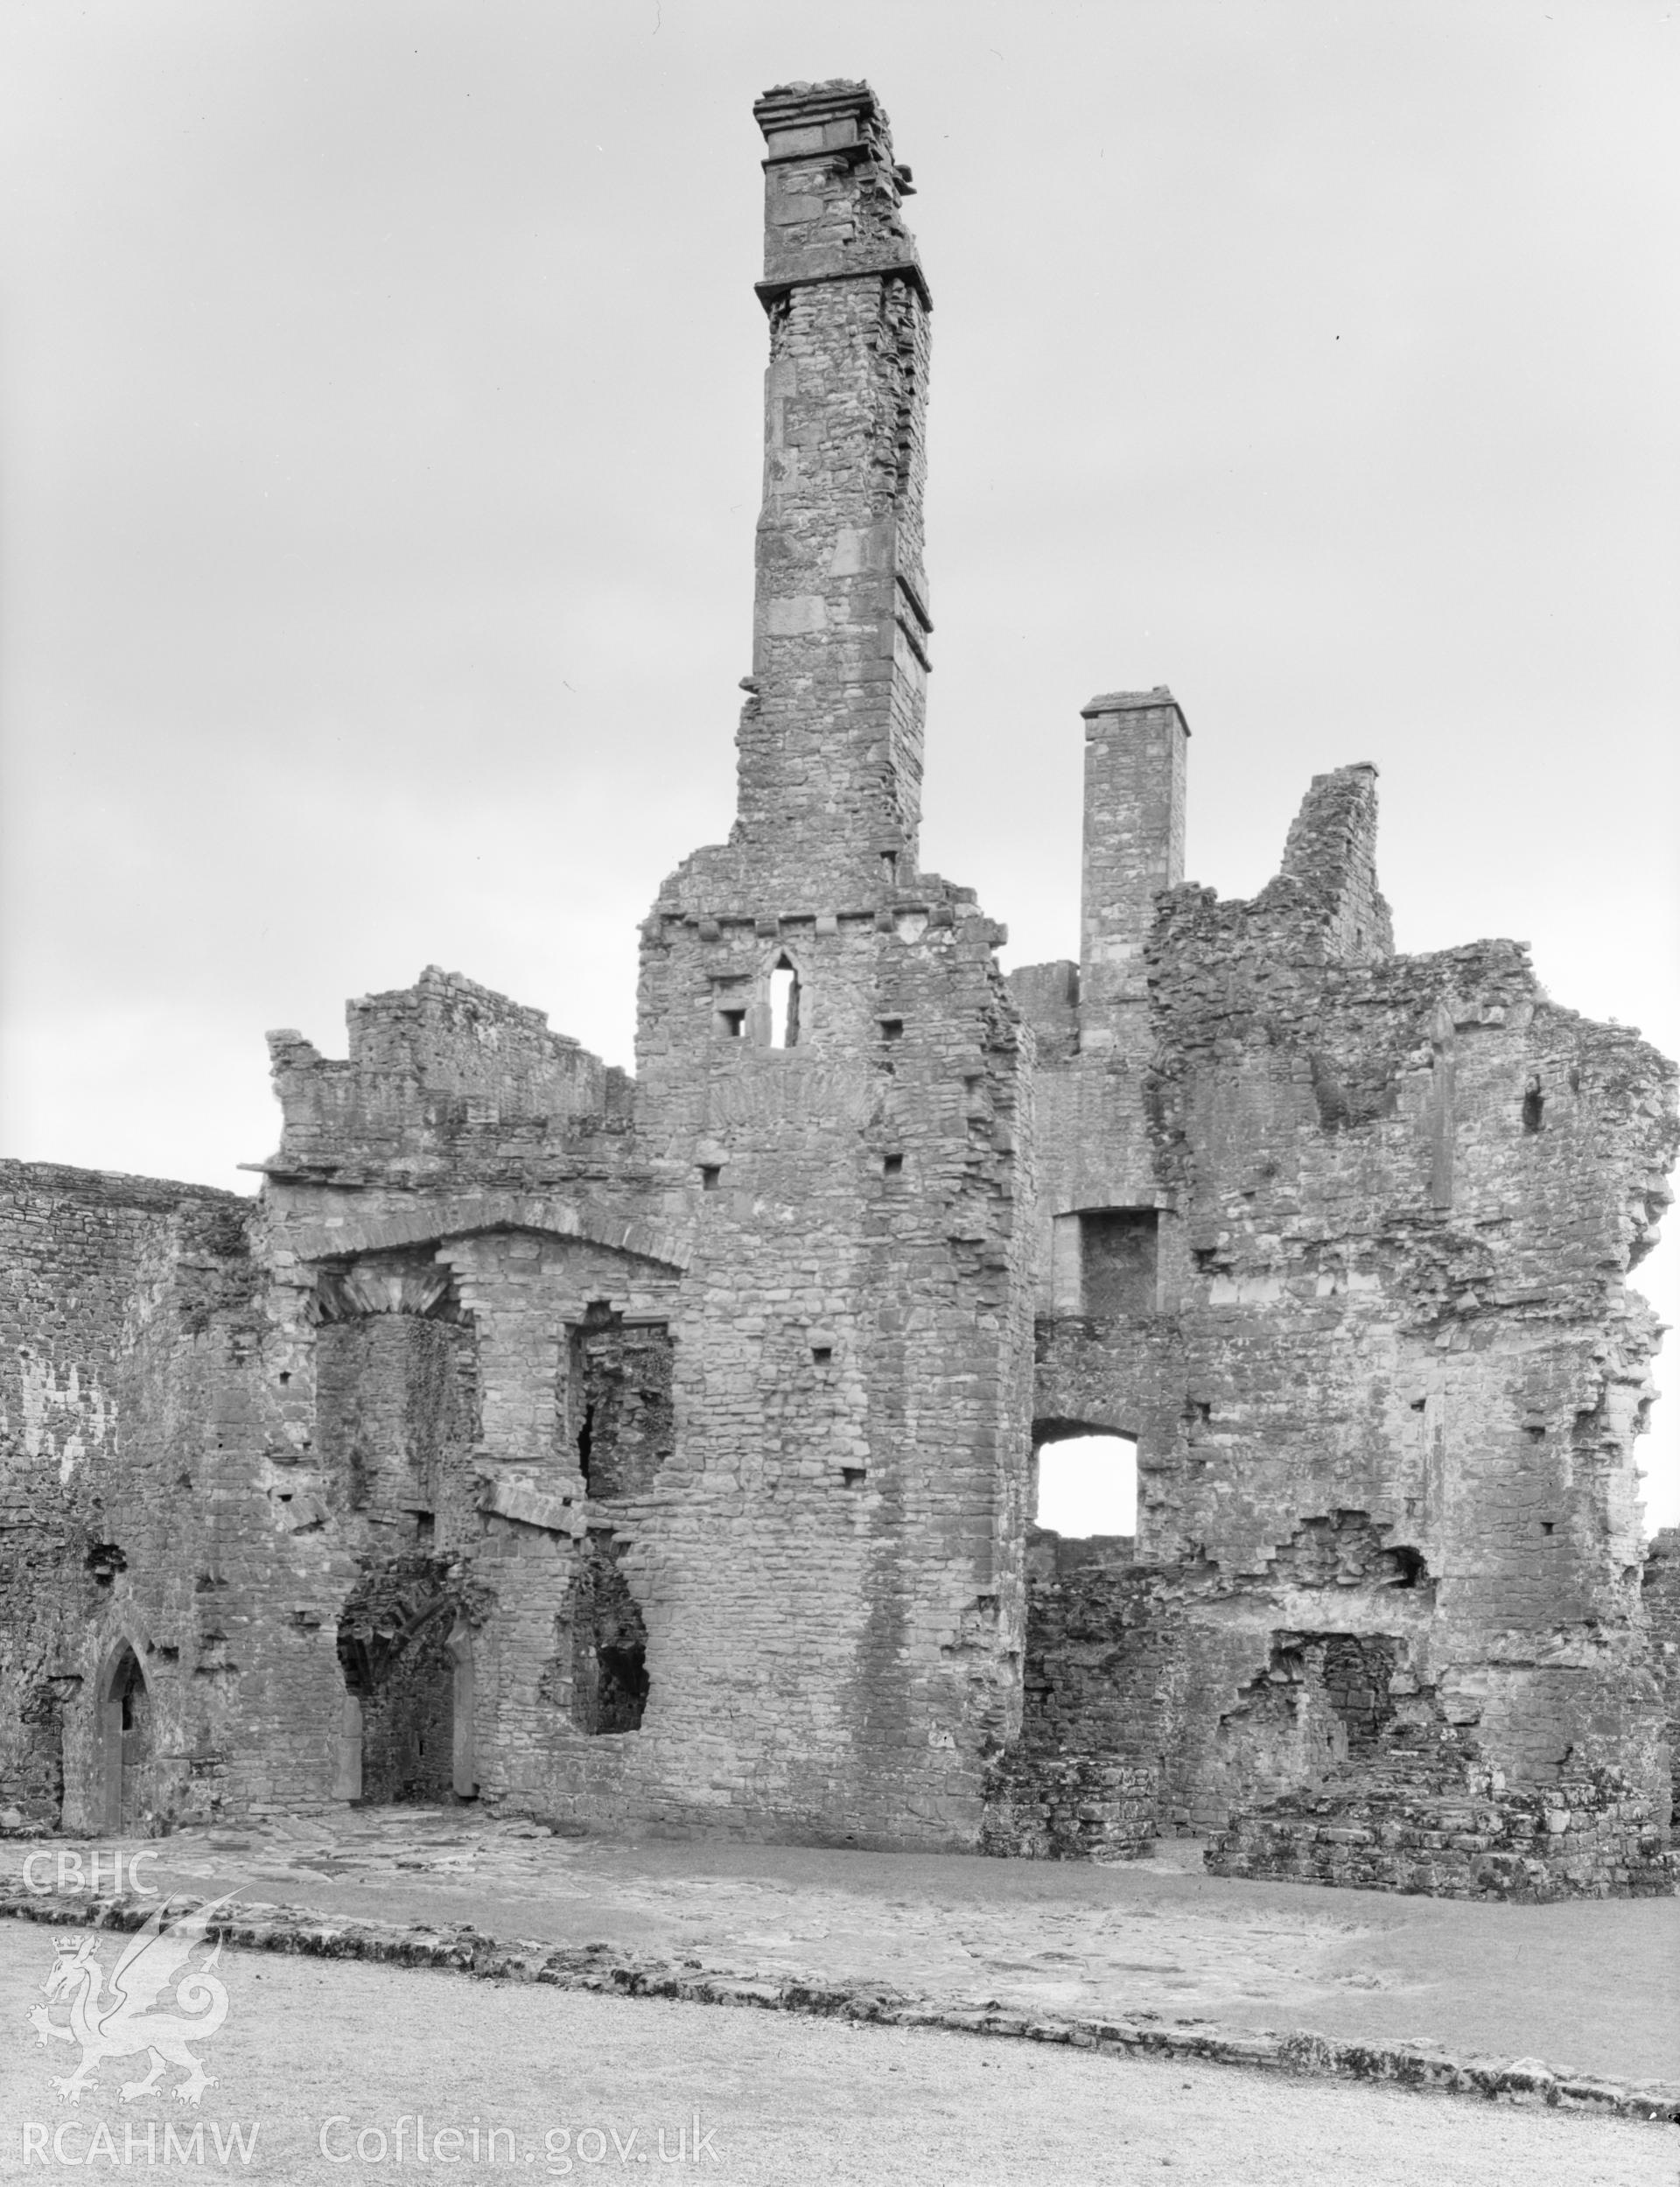 View of chimney at Coity Castle, Coity Higher taken 09.04.65.